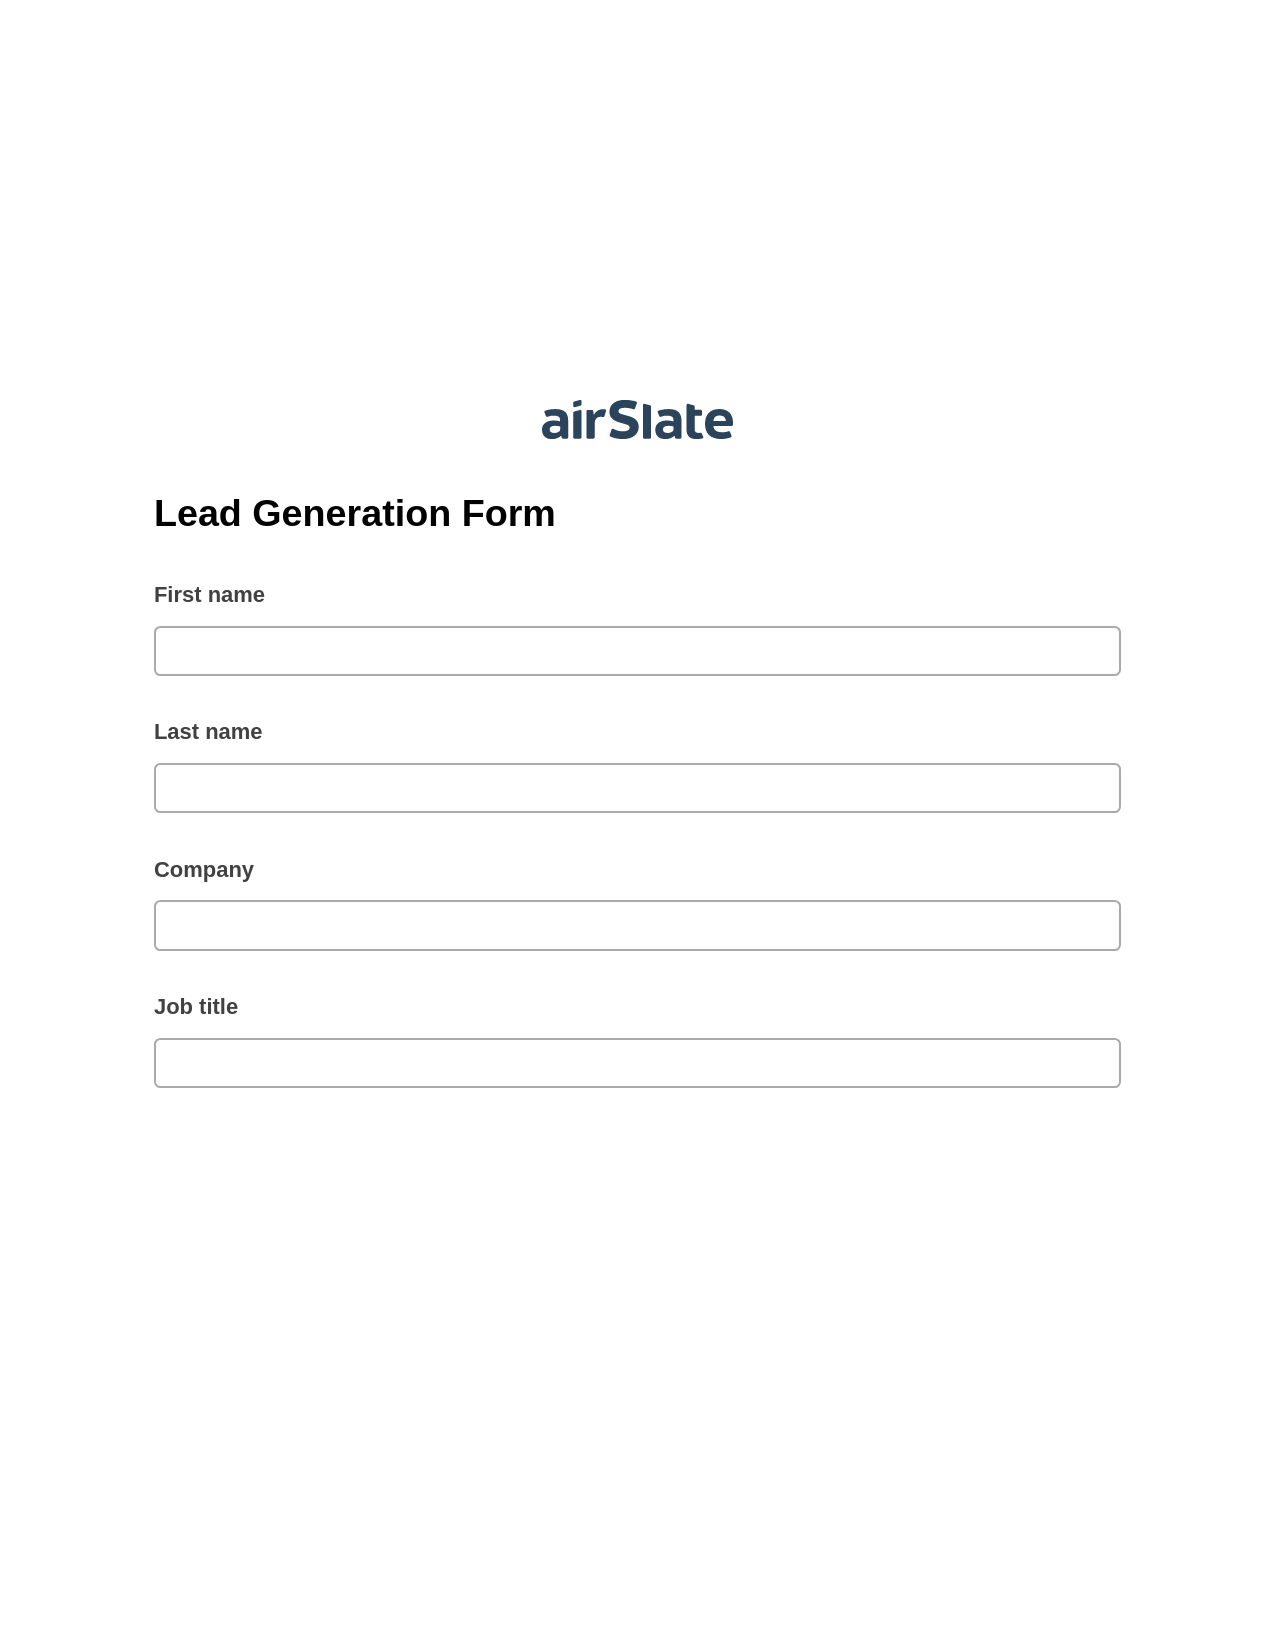 Lead Generation Form Pre-fill from AirTable Bot, Remove Tags From Slate Bot, Export to Smartsheet